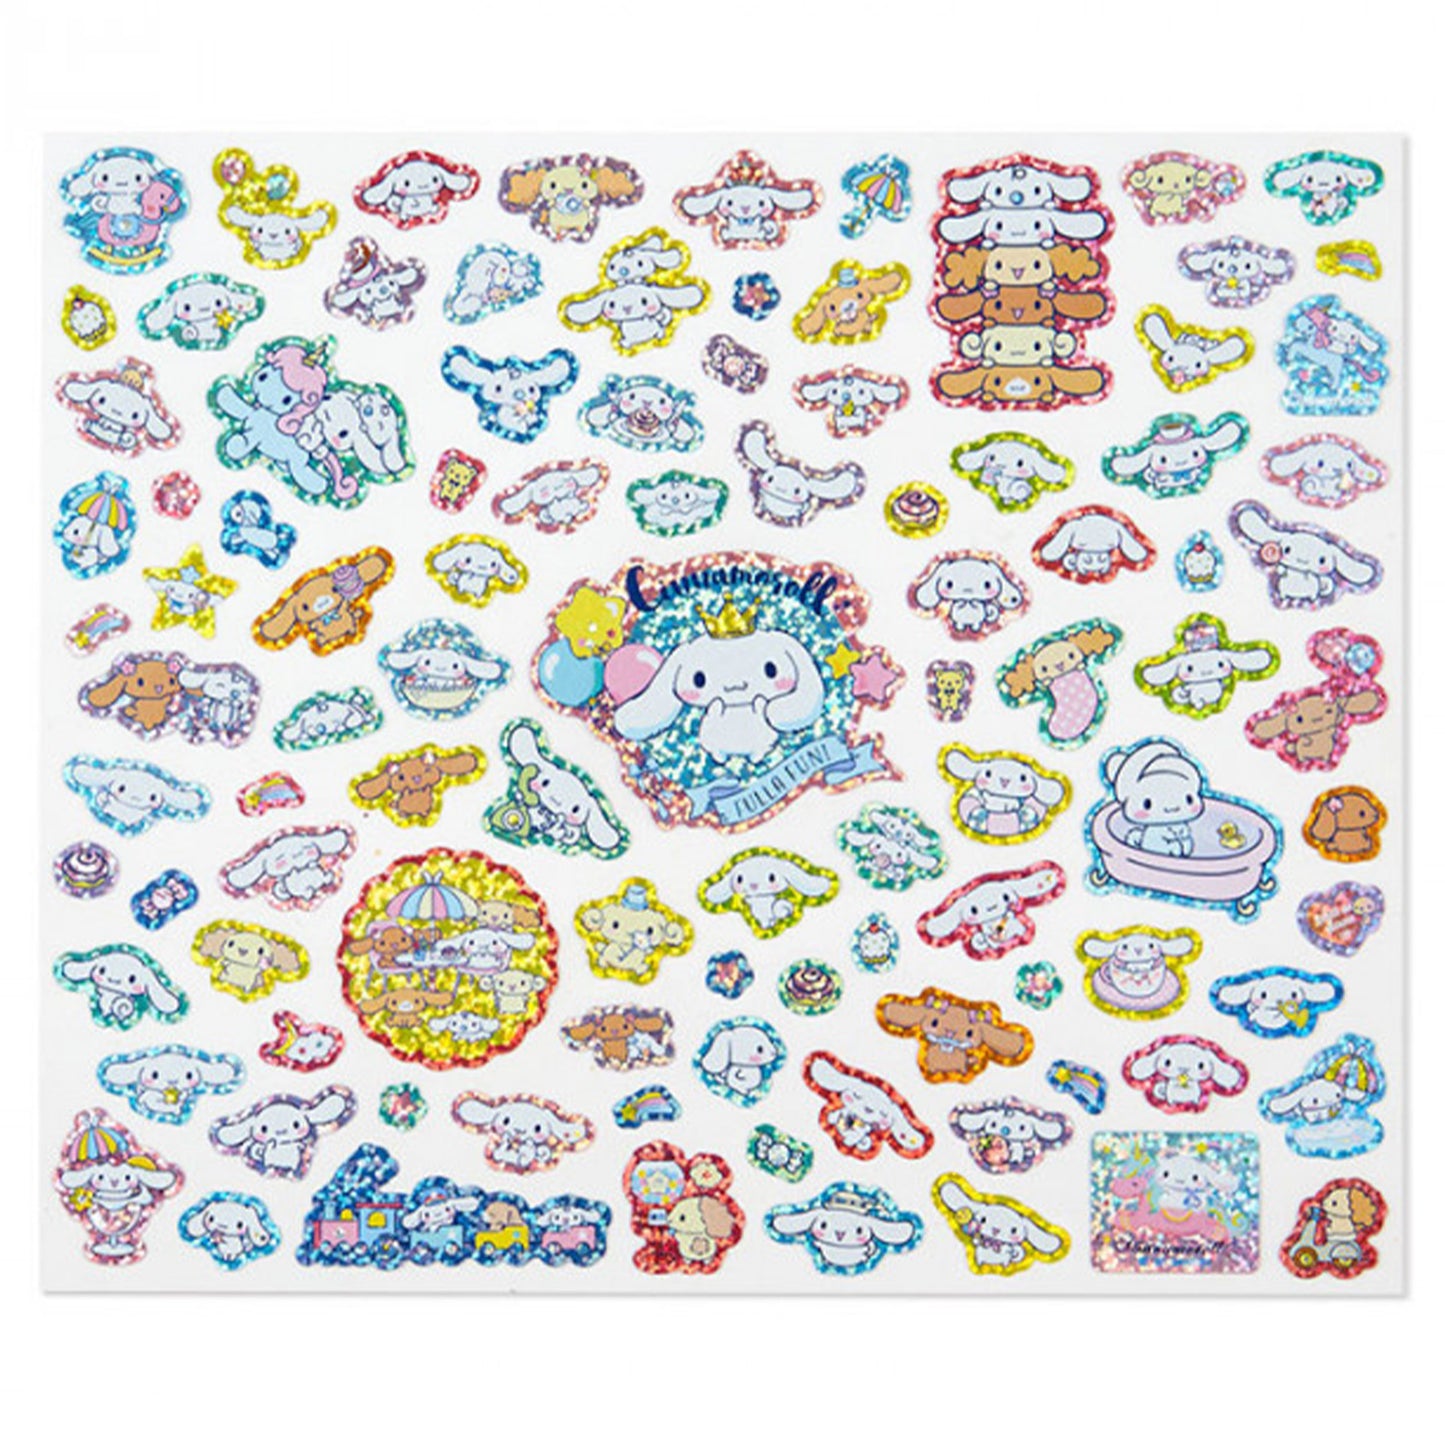 Cinnamoroll and Family Sticker Sheet